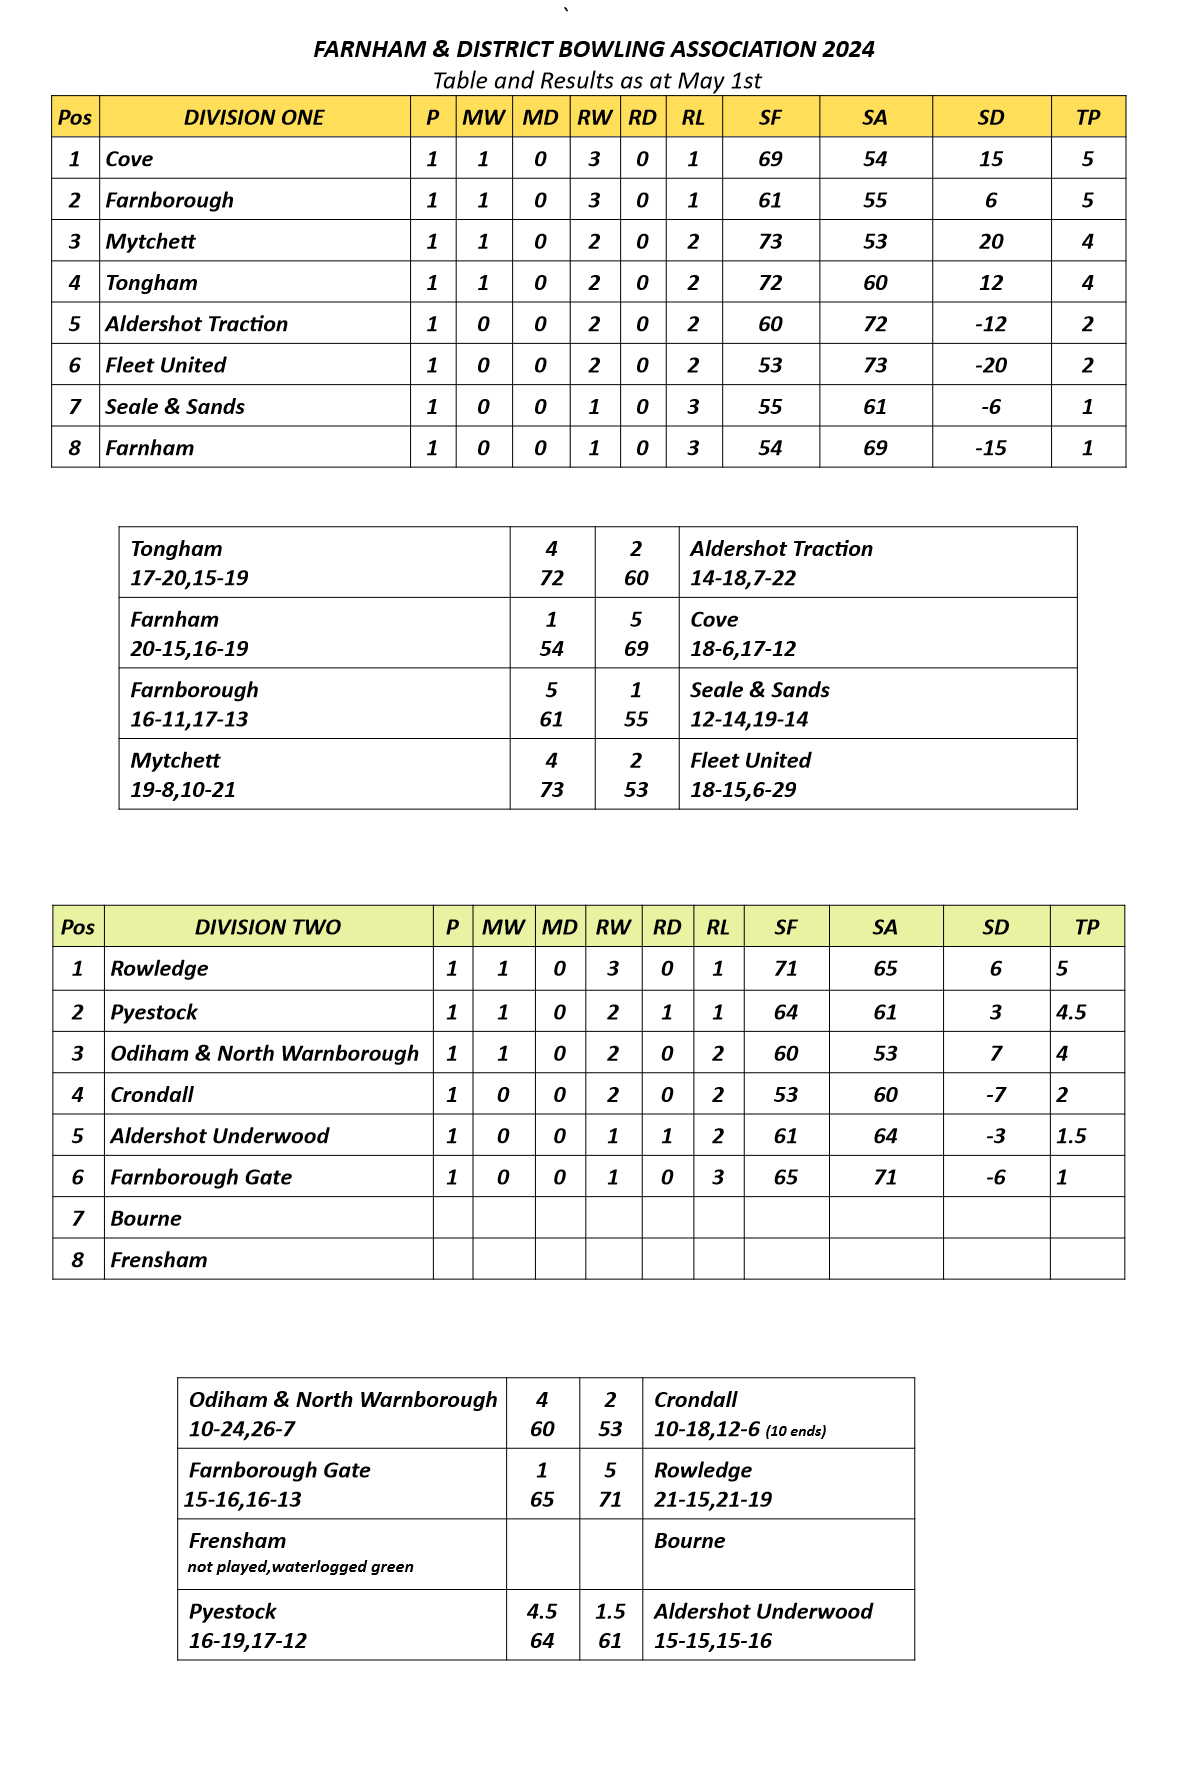  Farnham&District Bowling Association  Tables and Results